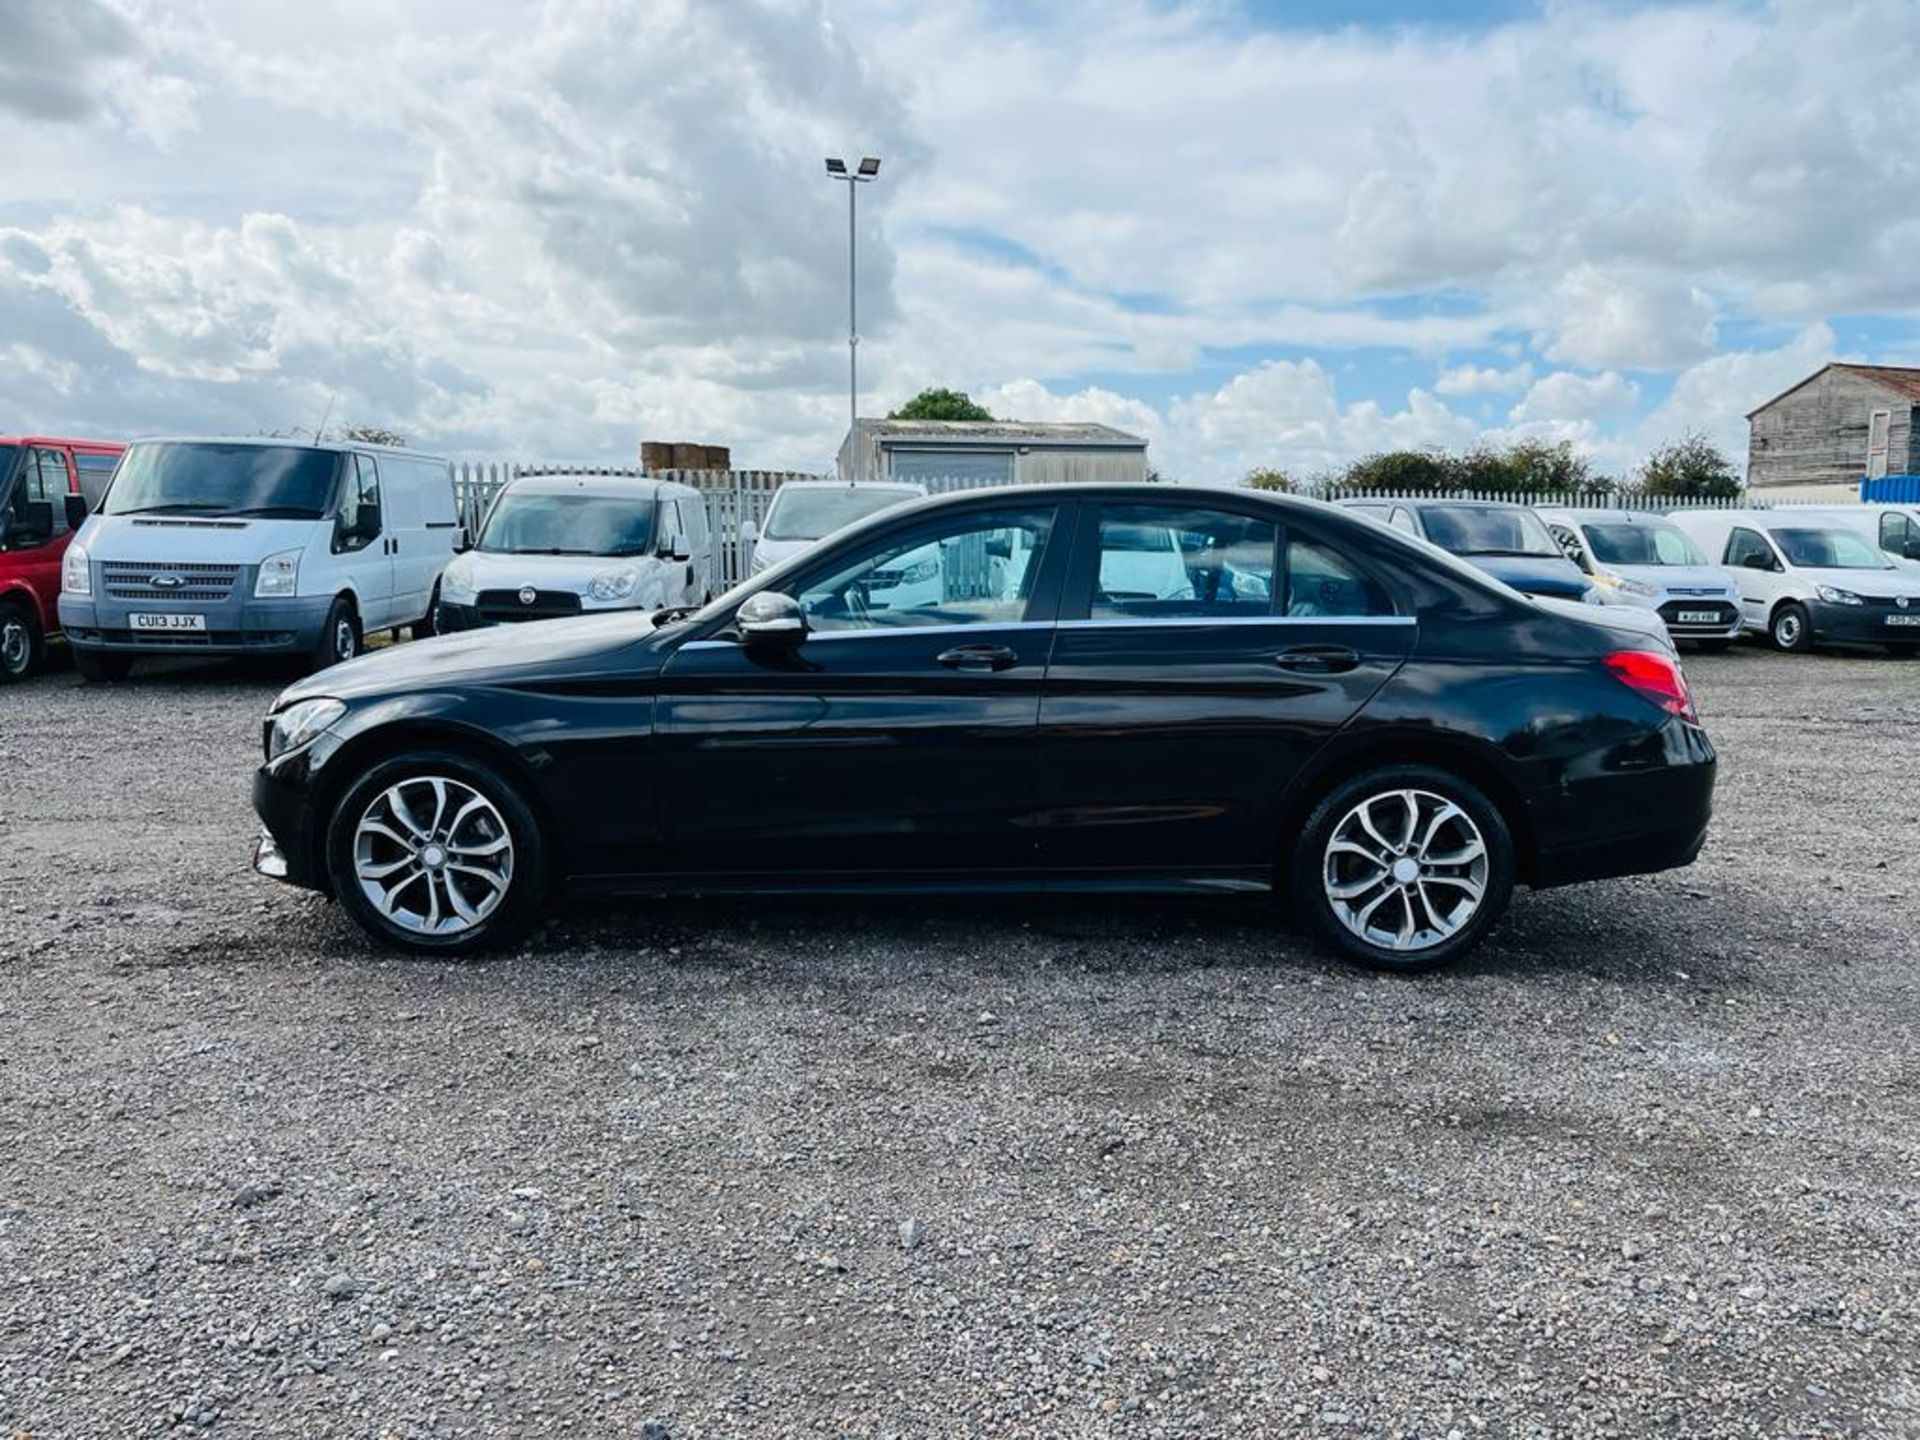 ** ON SALE ** Mercedes - Benz C220 SE Saloon 2.1 2015 "15 Reg" - Automatic - A/C - Only 72548 Miles - Image 4 of 29